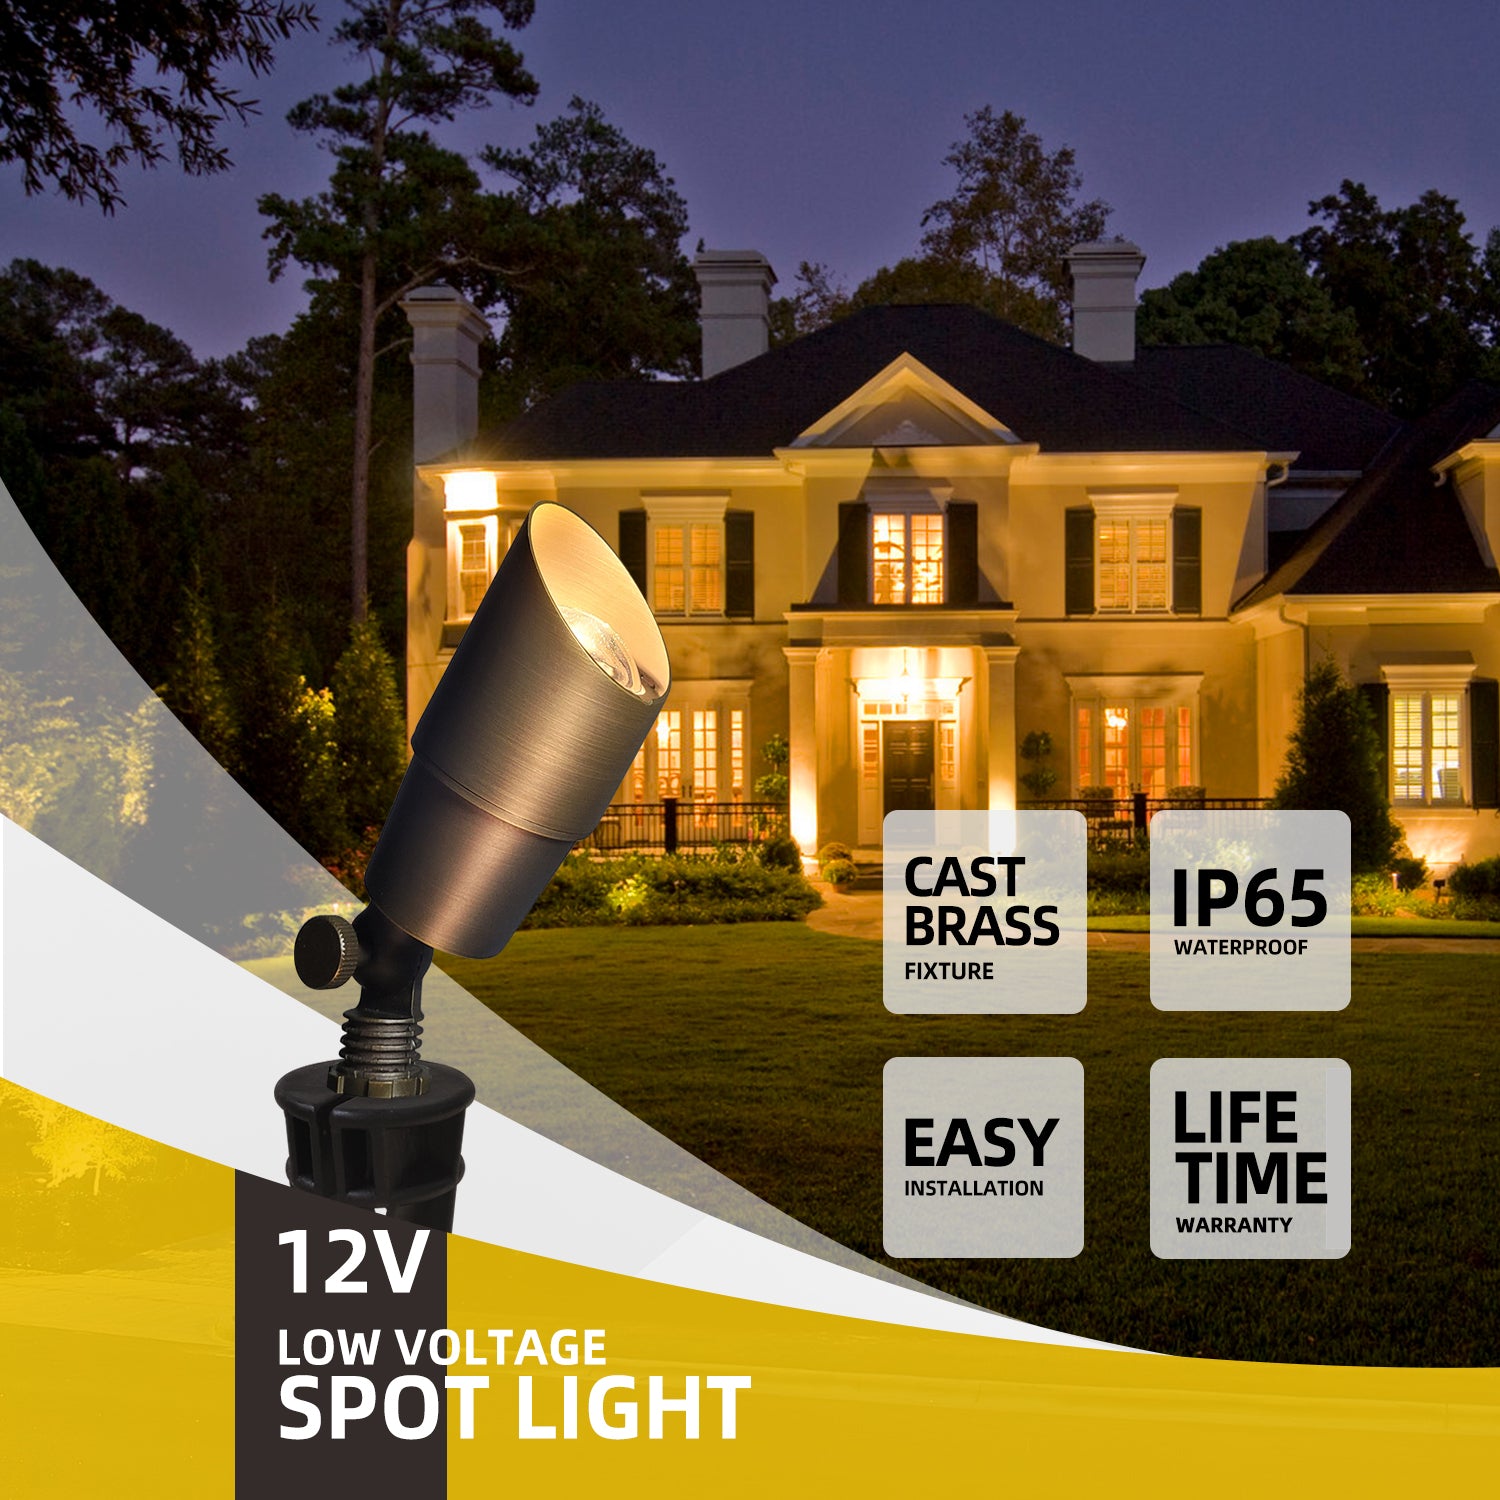 Elegant house illuminated at night by a 12V low voltage LED brass spotlight, COA101B model, featuring cast brass fixture, IP65 waterproof rating, easy installation, and lifetime warranty.